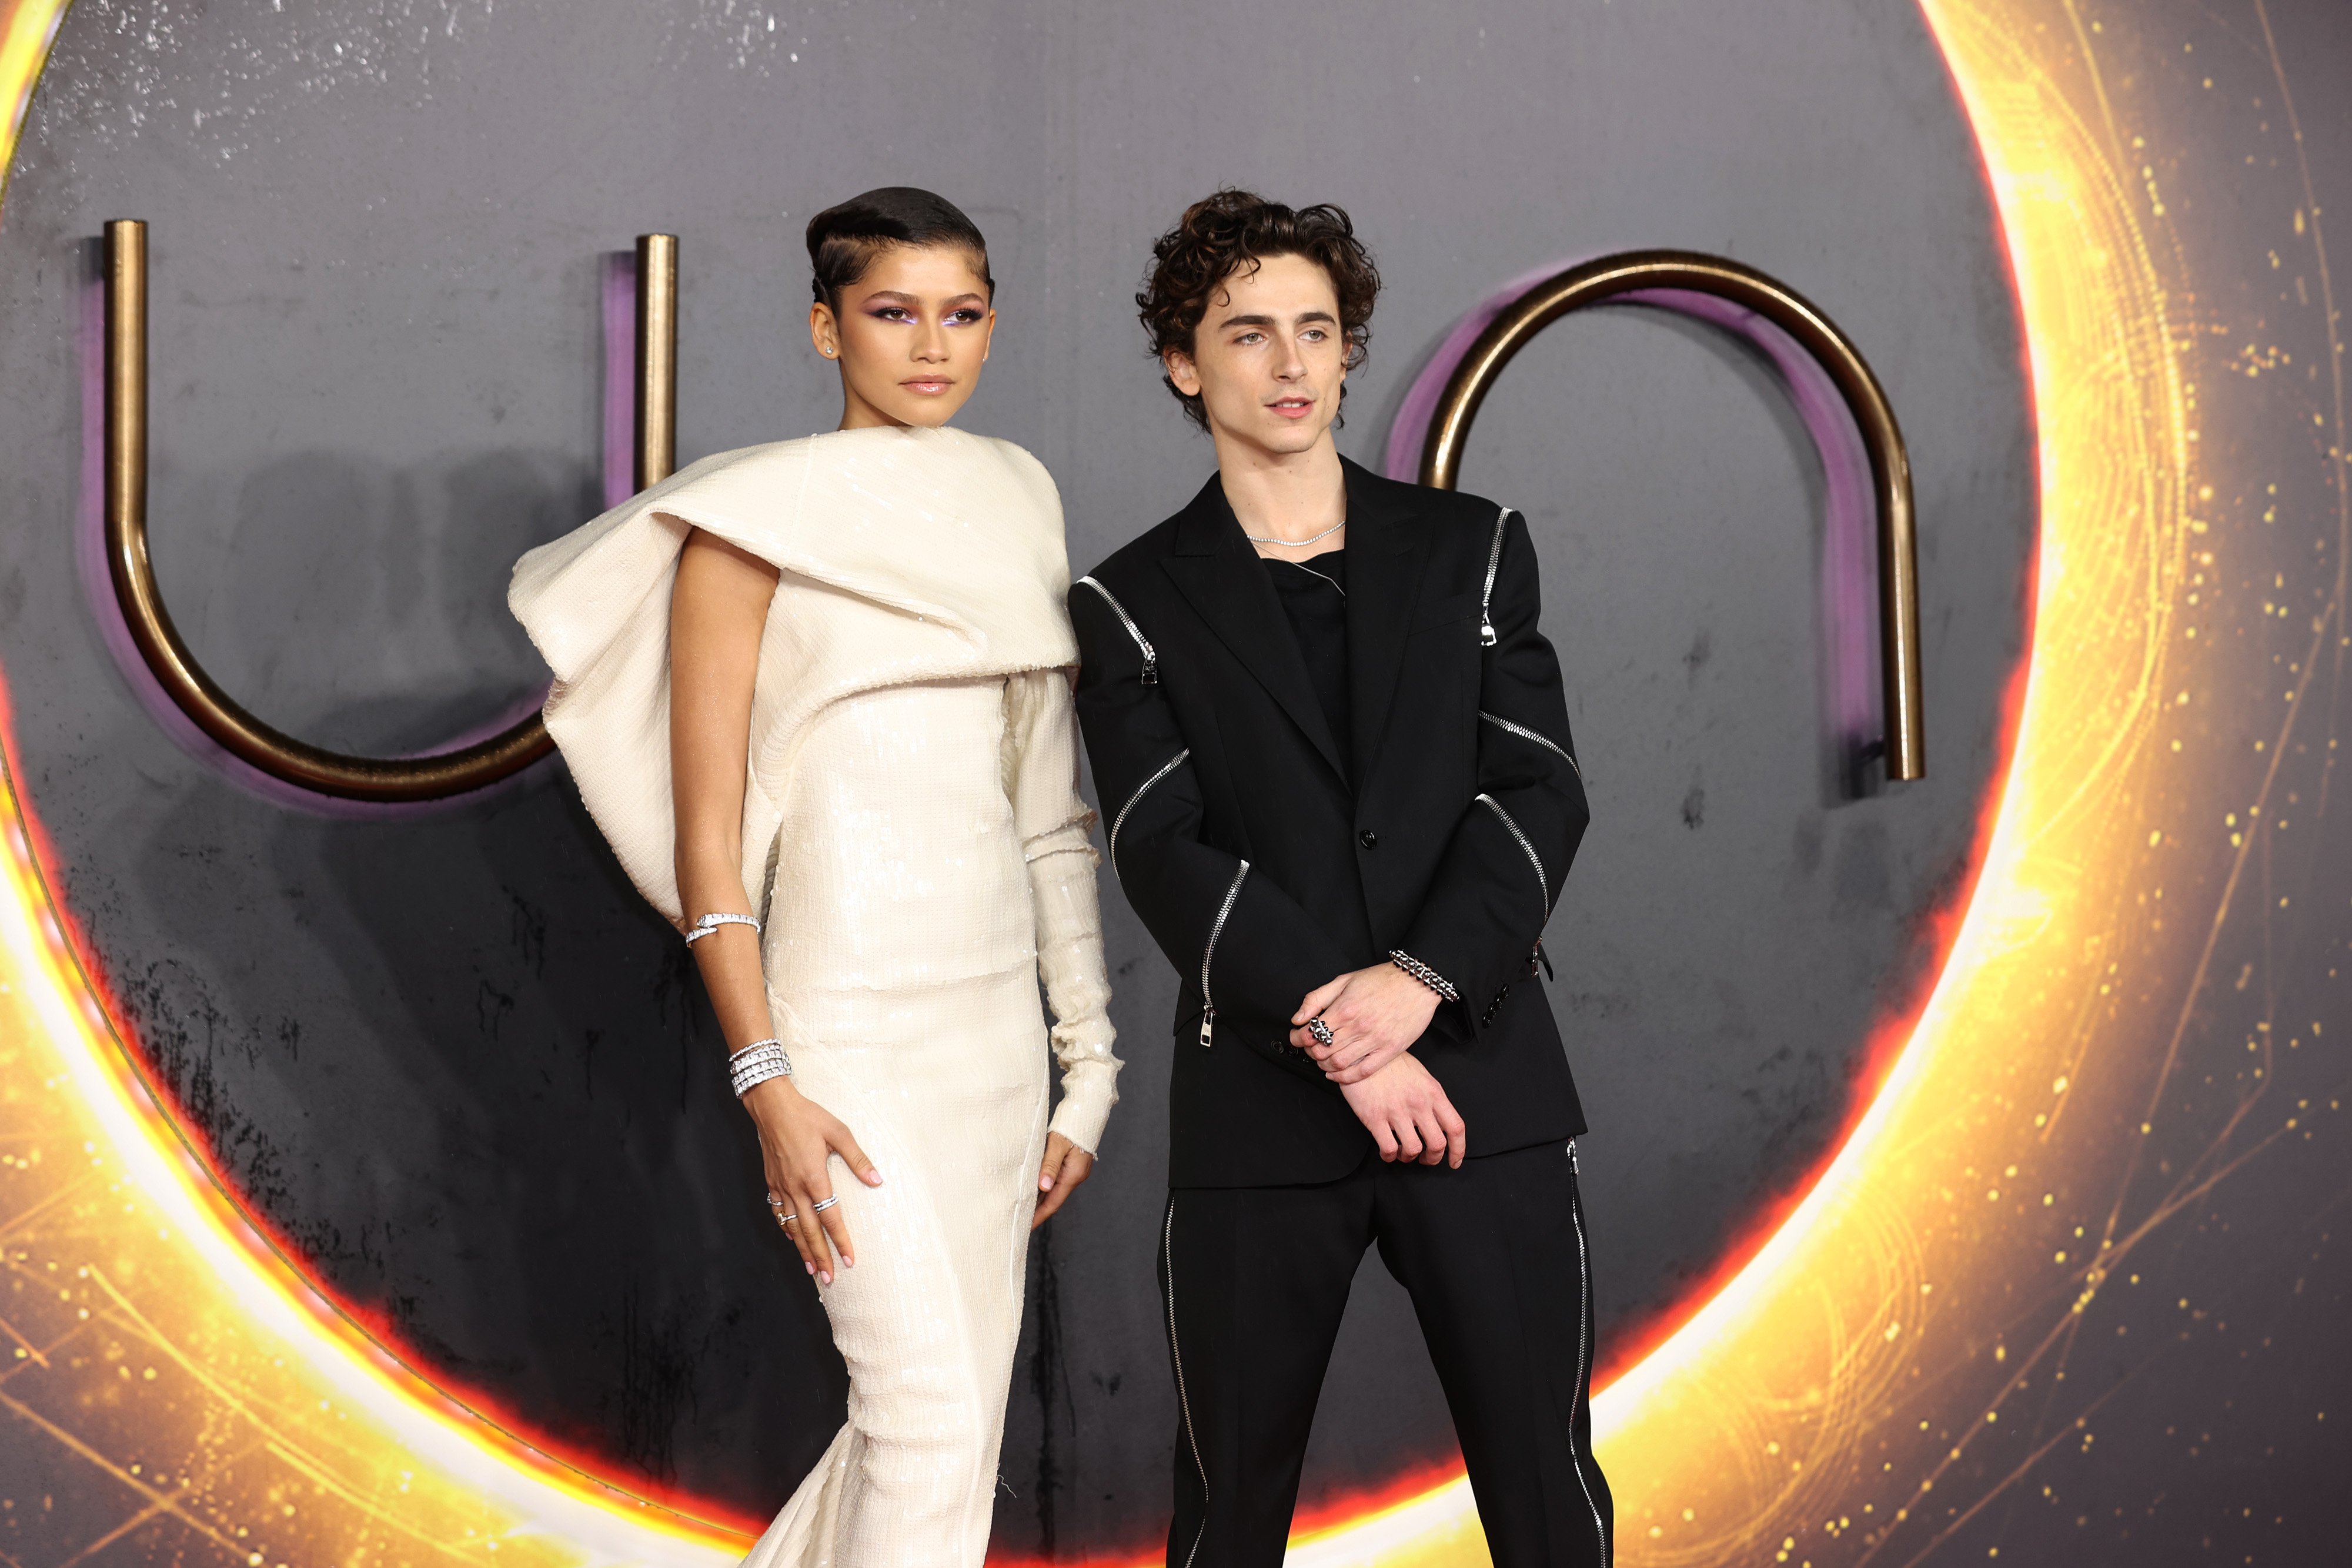 Zendaya and Timothee Chalamet appear at the premiere for Dune